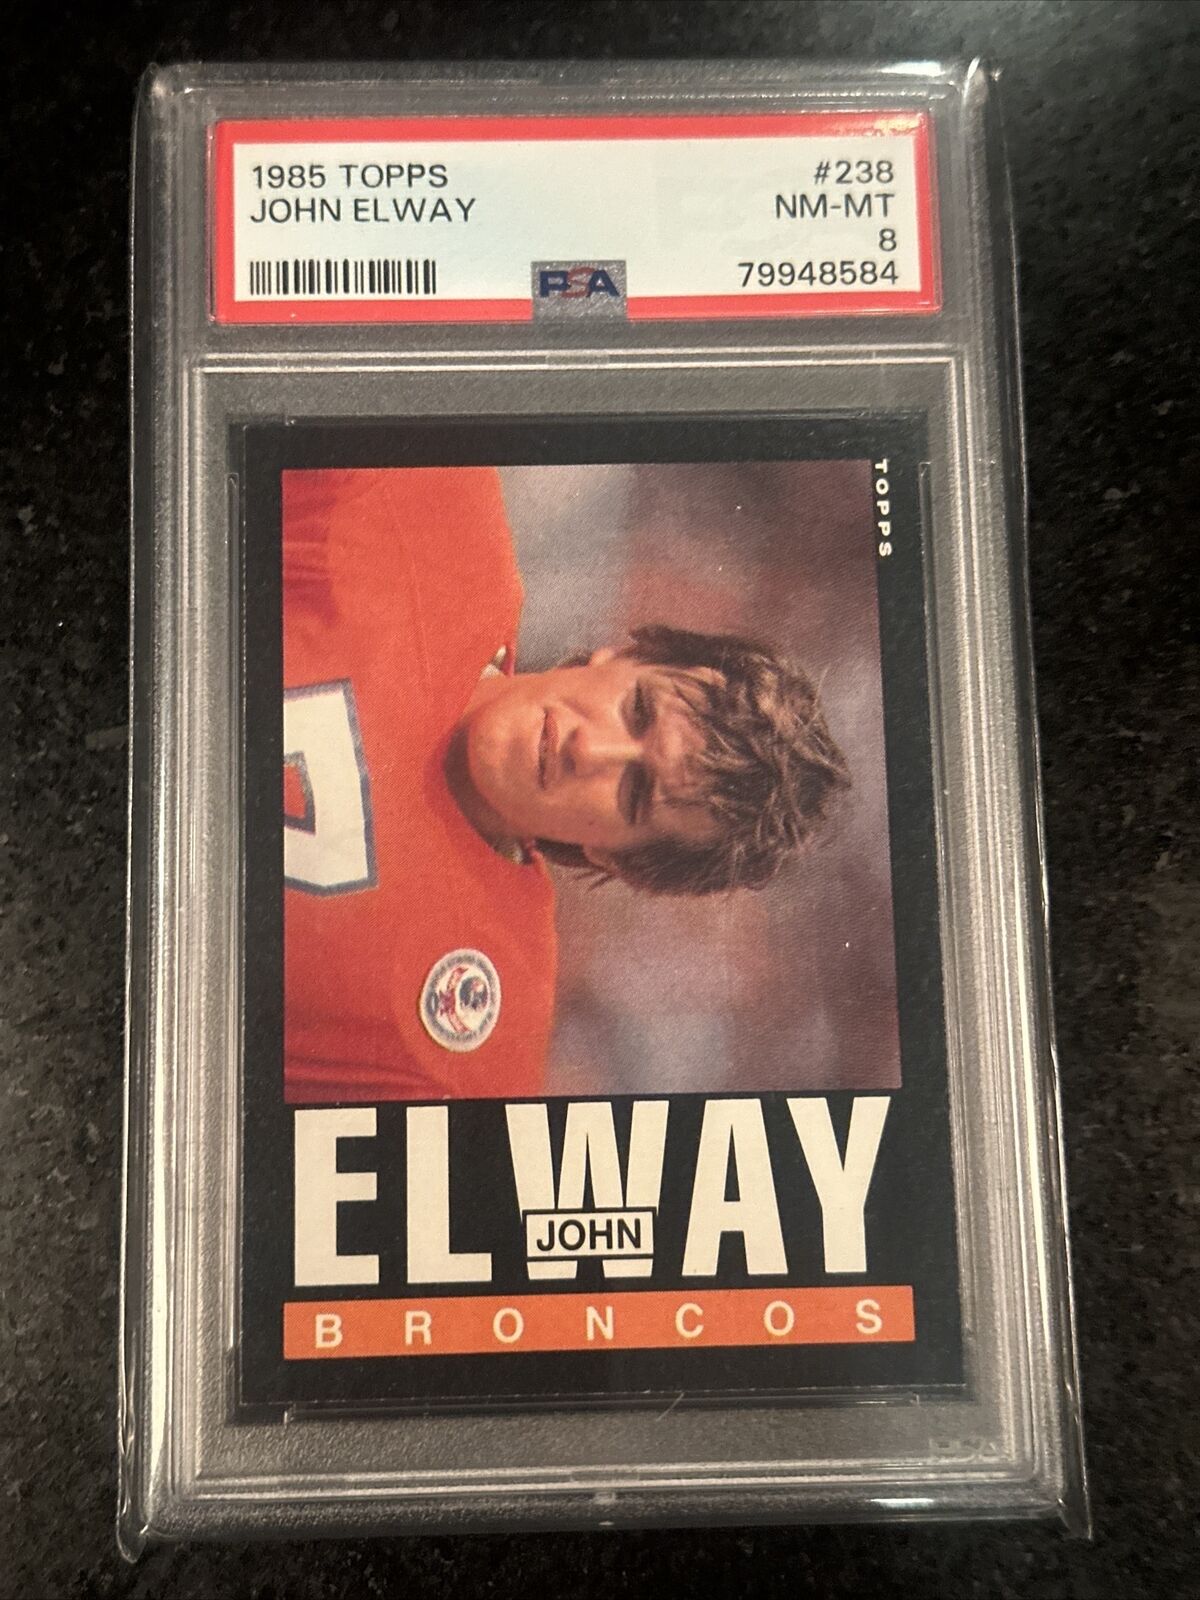 1985 Topps John Elway #238 PSA 8 NM-MT Broncos 2nd Year - Only 220 Graded Higher